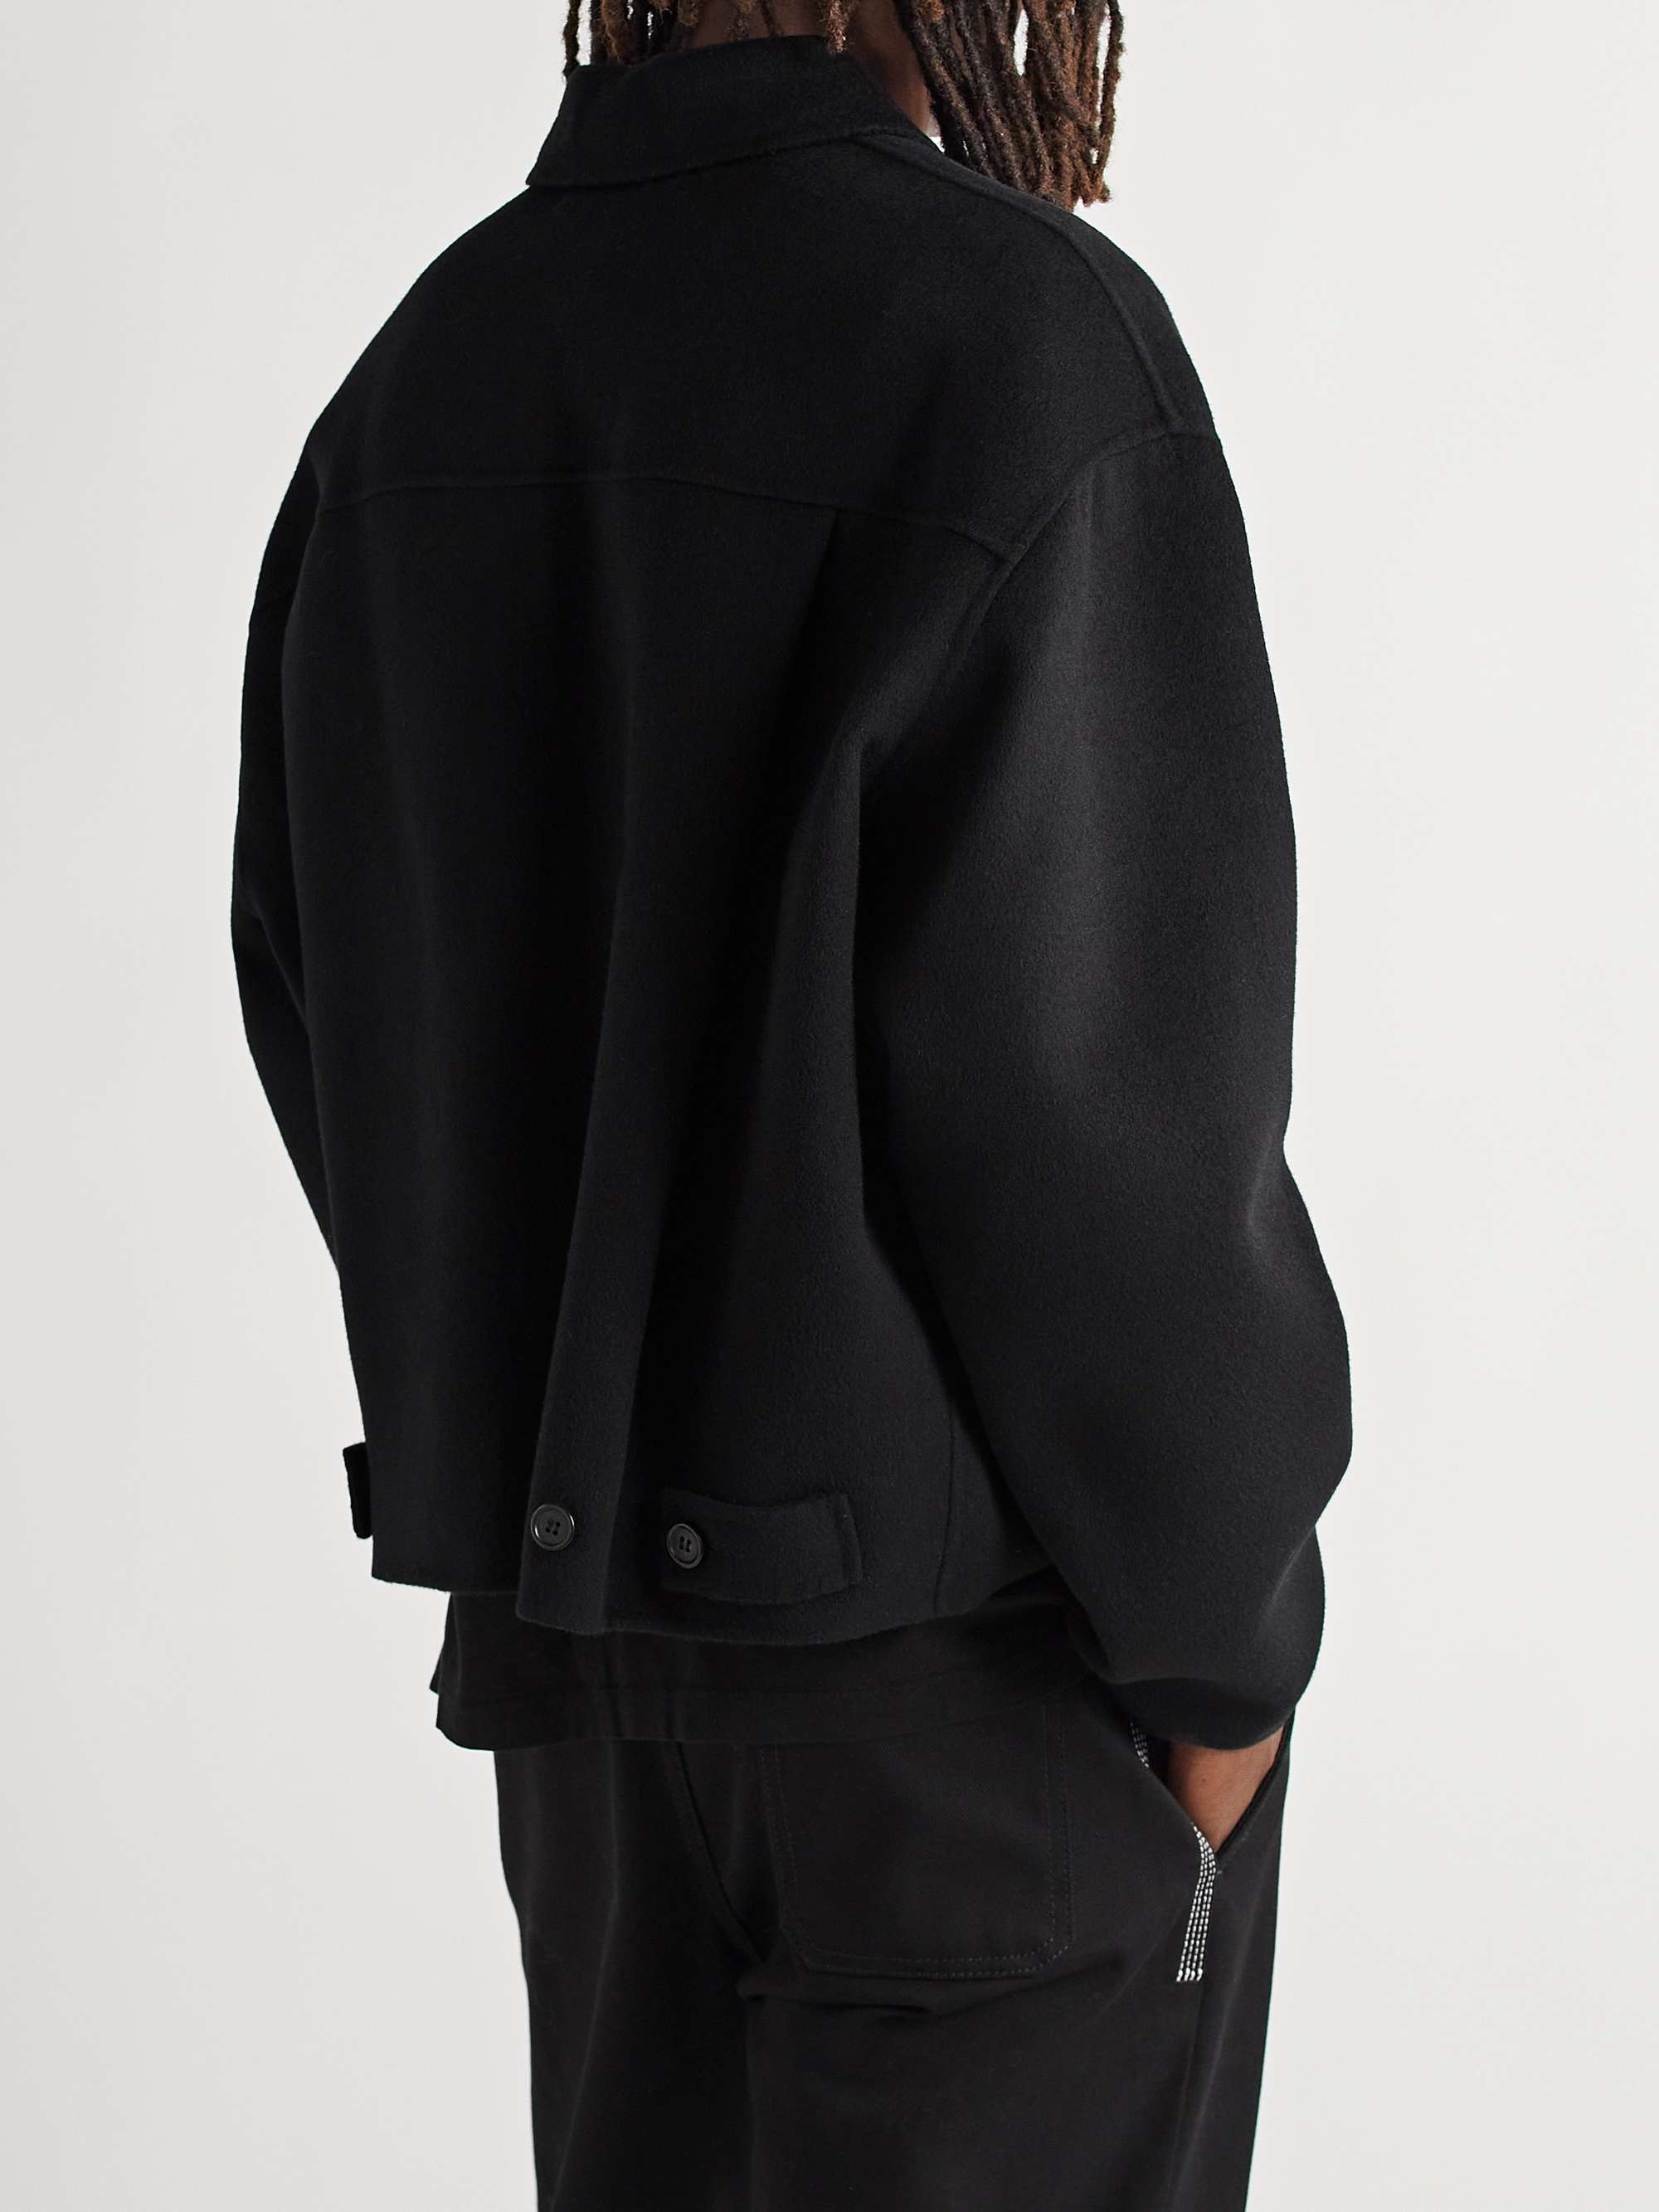 ACNE STUDIOS Double-Faced Wool Jacket